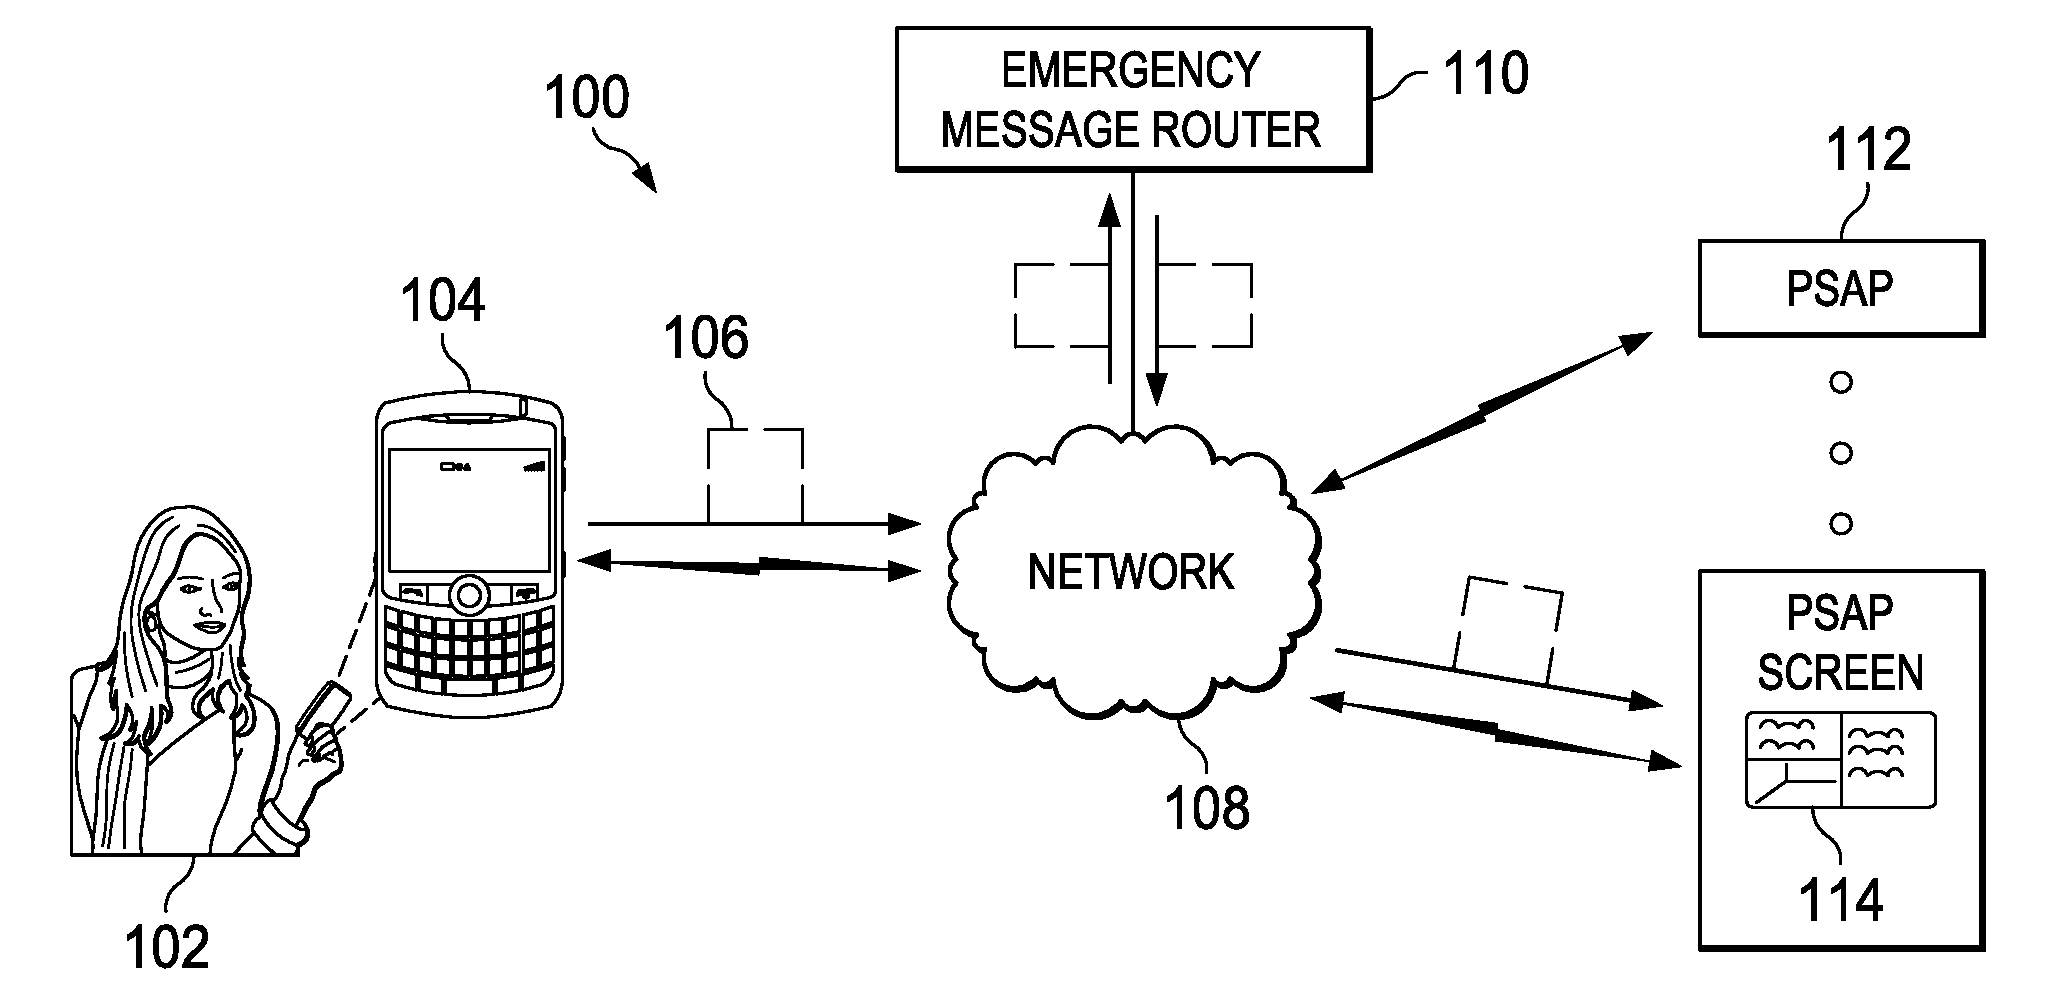 System and method for generating and communicating updated emergency messages